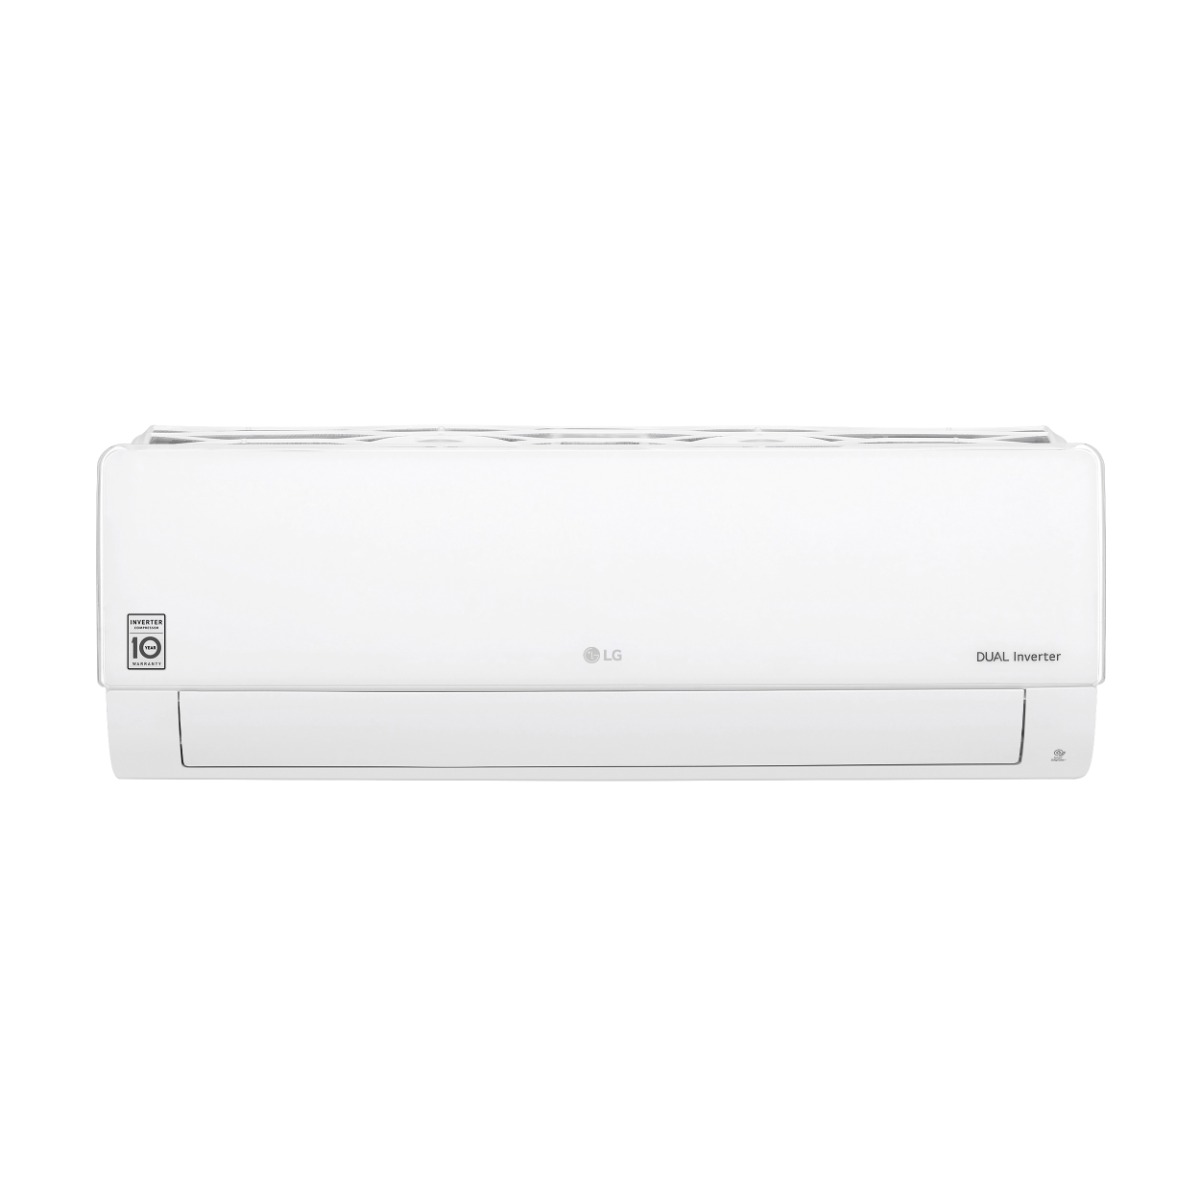 LG Dual Cool Split Inverter Air Conditioner, 3 HP, Cooling And Heating, White - S4-W24K23AE